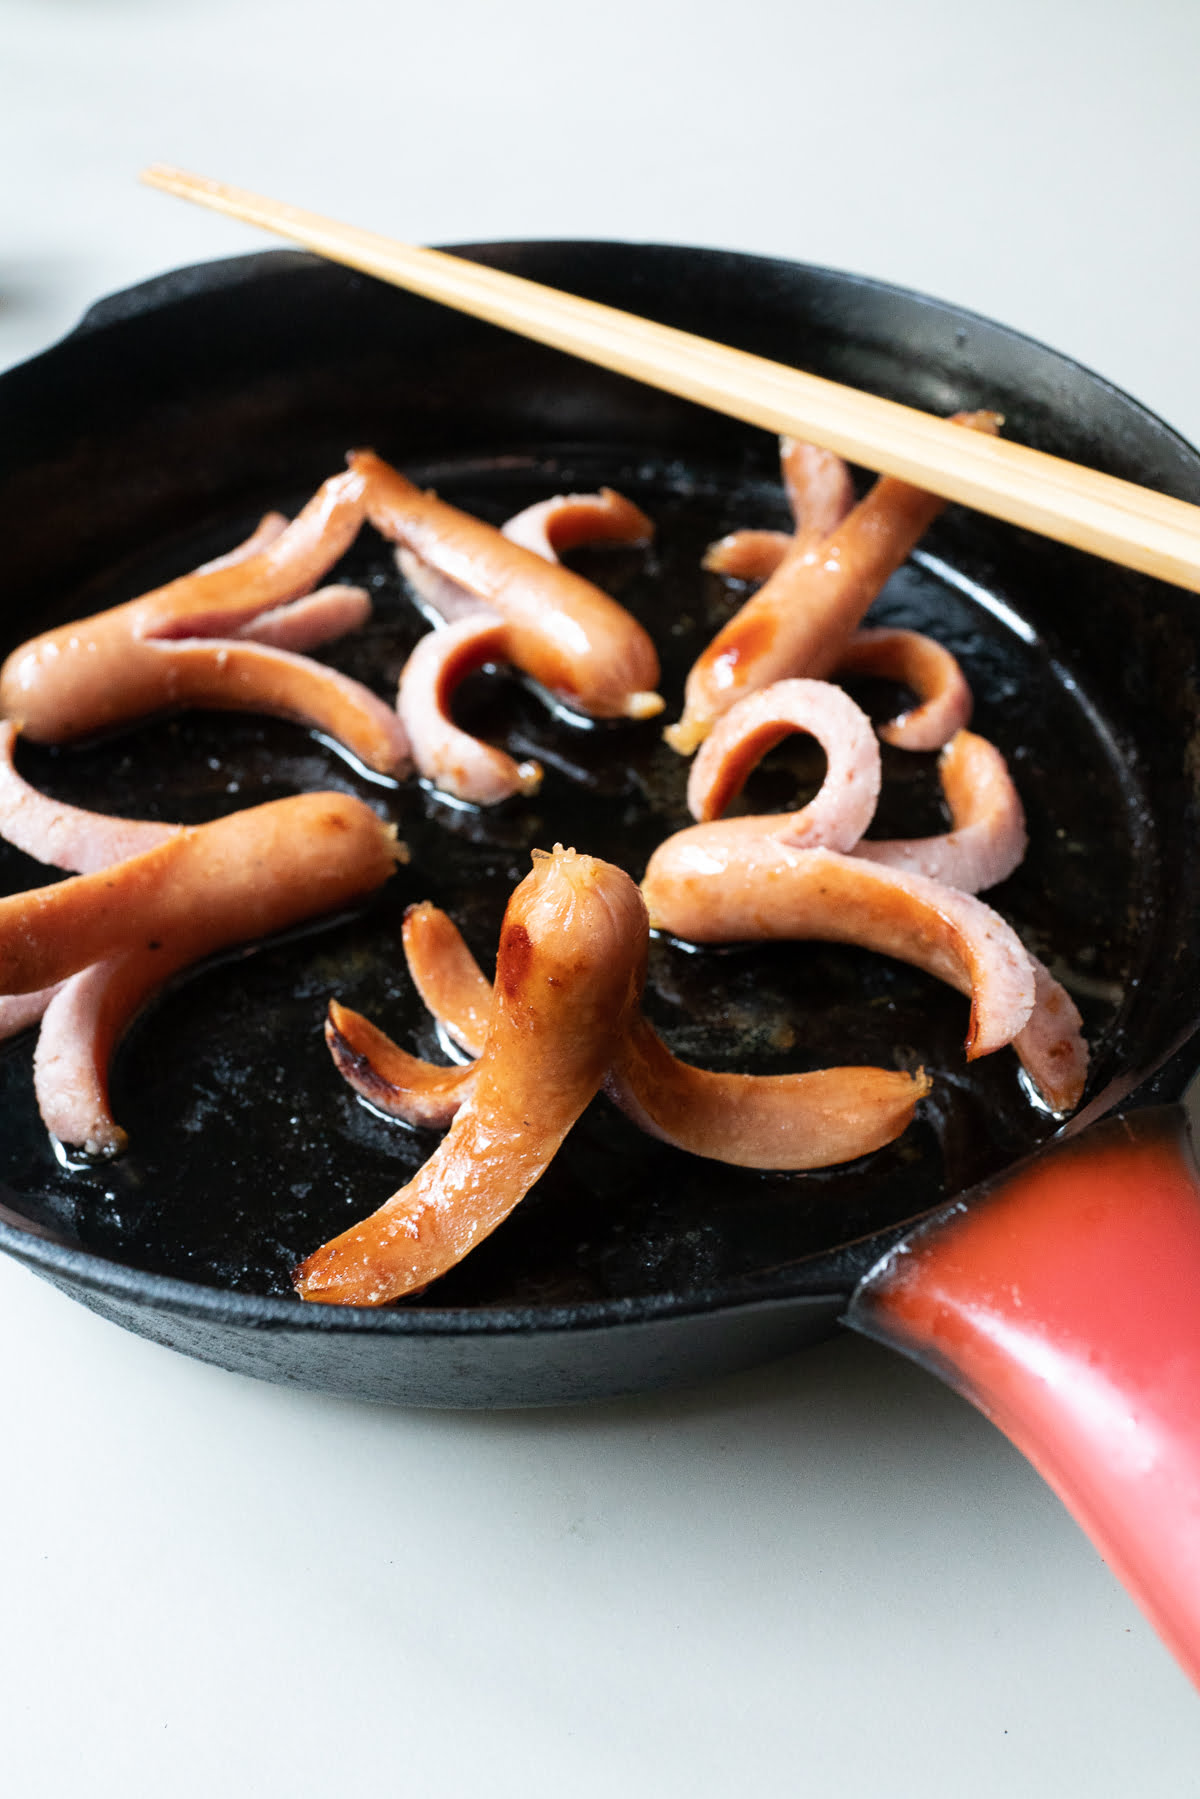 Six cooked Octopus Hot Dogs in a cast iron pan.